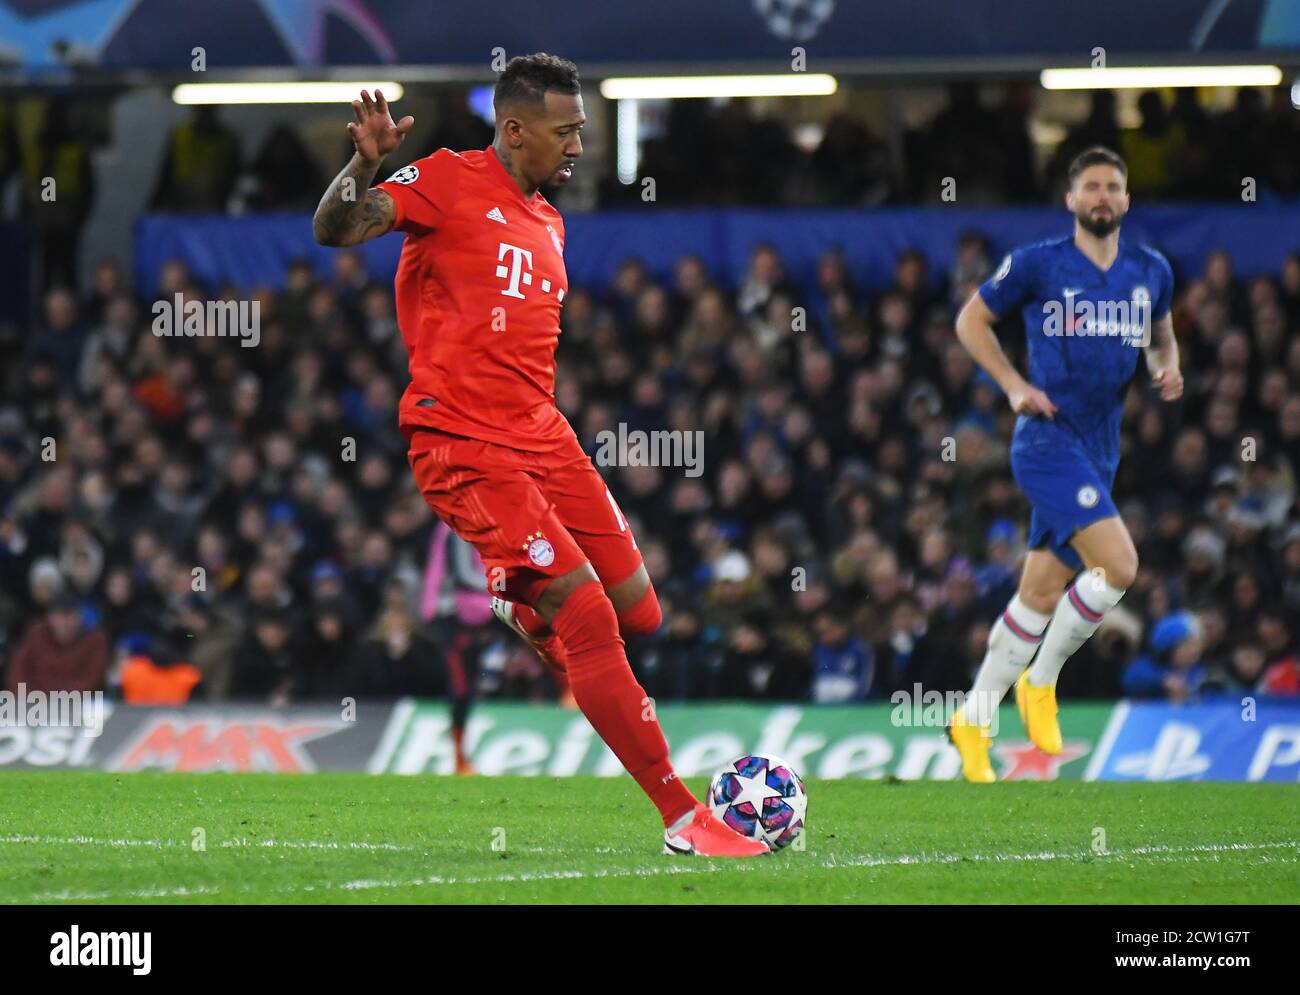 LONDON, ENGLAND - FEBRUARY 26, 2020: Jerome Boateng of Bayern pictured during the 2019/20 UEFA Champions League Round of 16 game between Chelsea FC and Bayern Munich at Stamford Bridge. Stock Photo